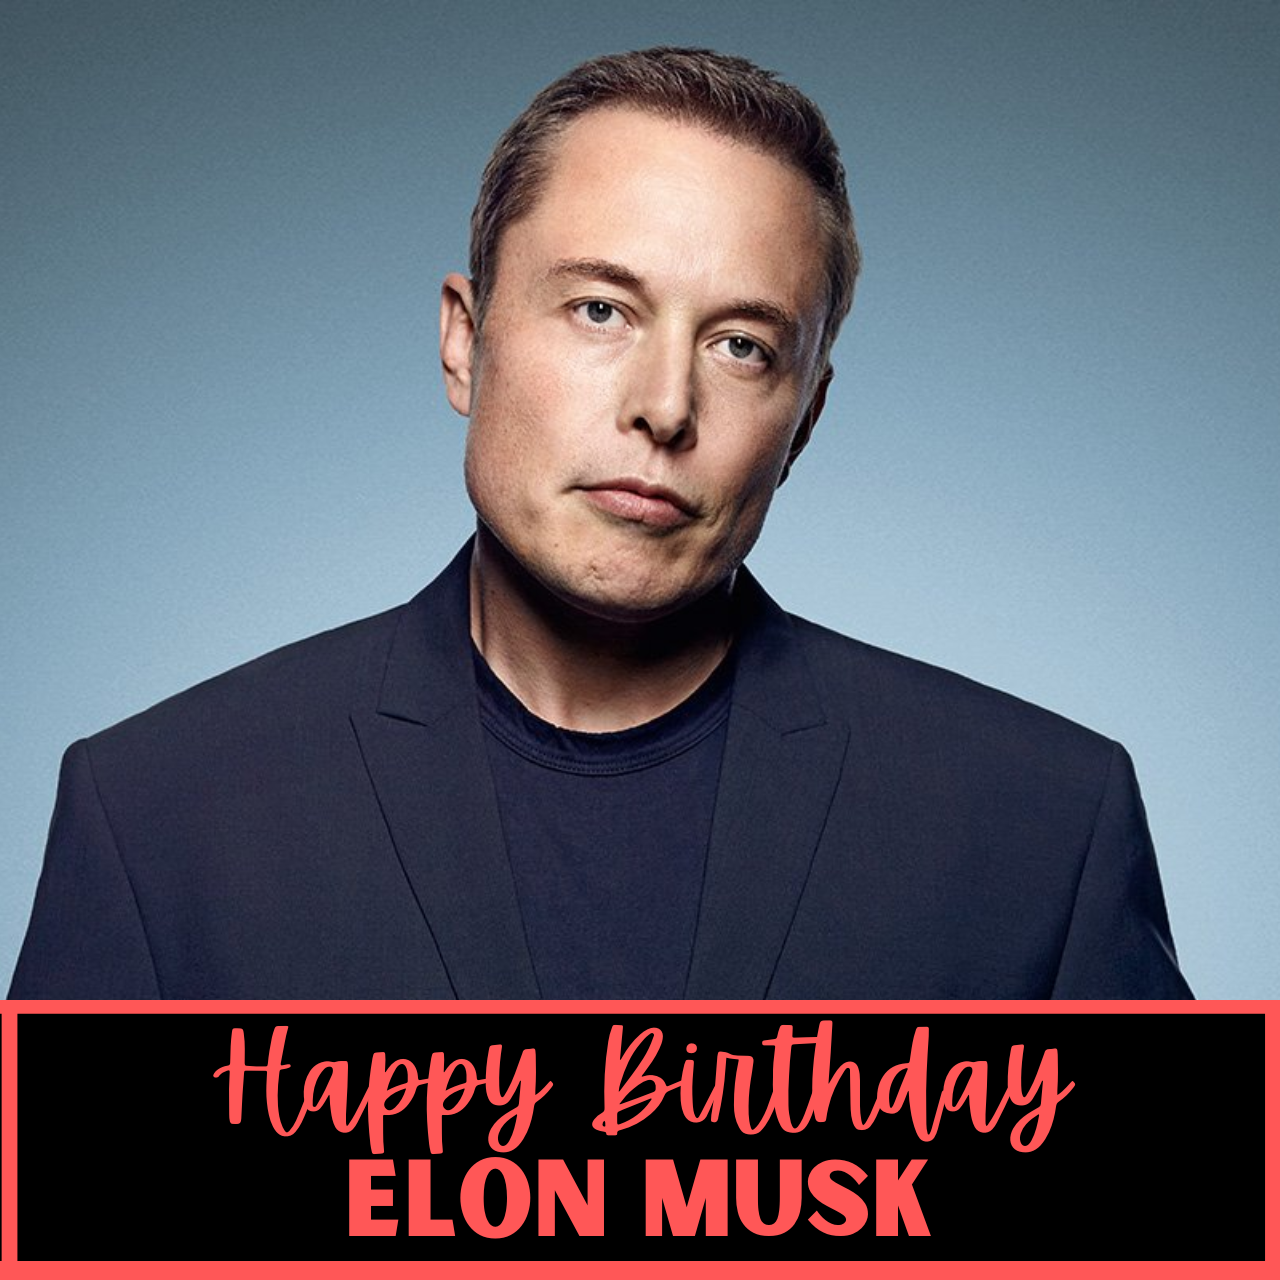 Happy Birthday Elon Musk: Wishes, Quotes, Images, Messages, Greetings, Posters to Greet Tesla Founder